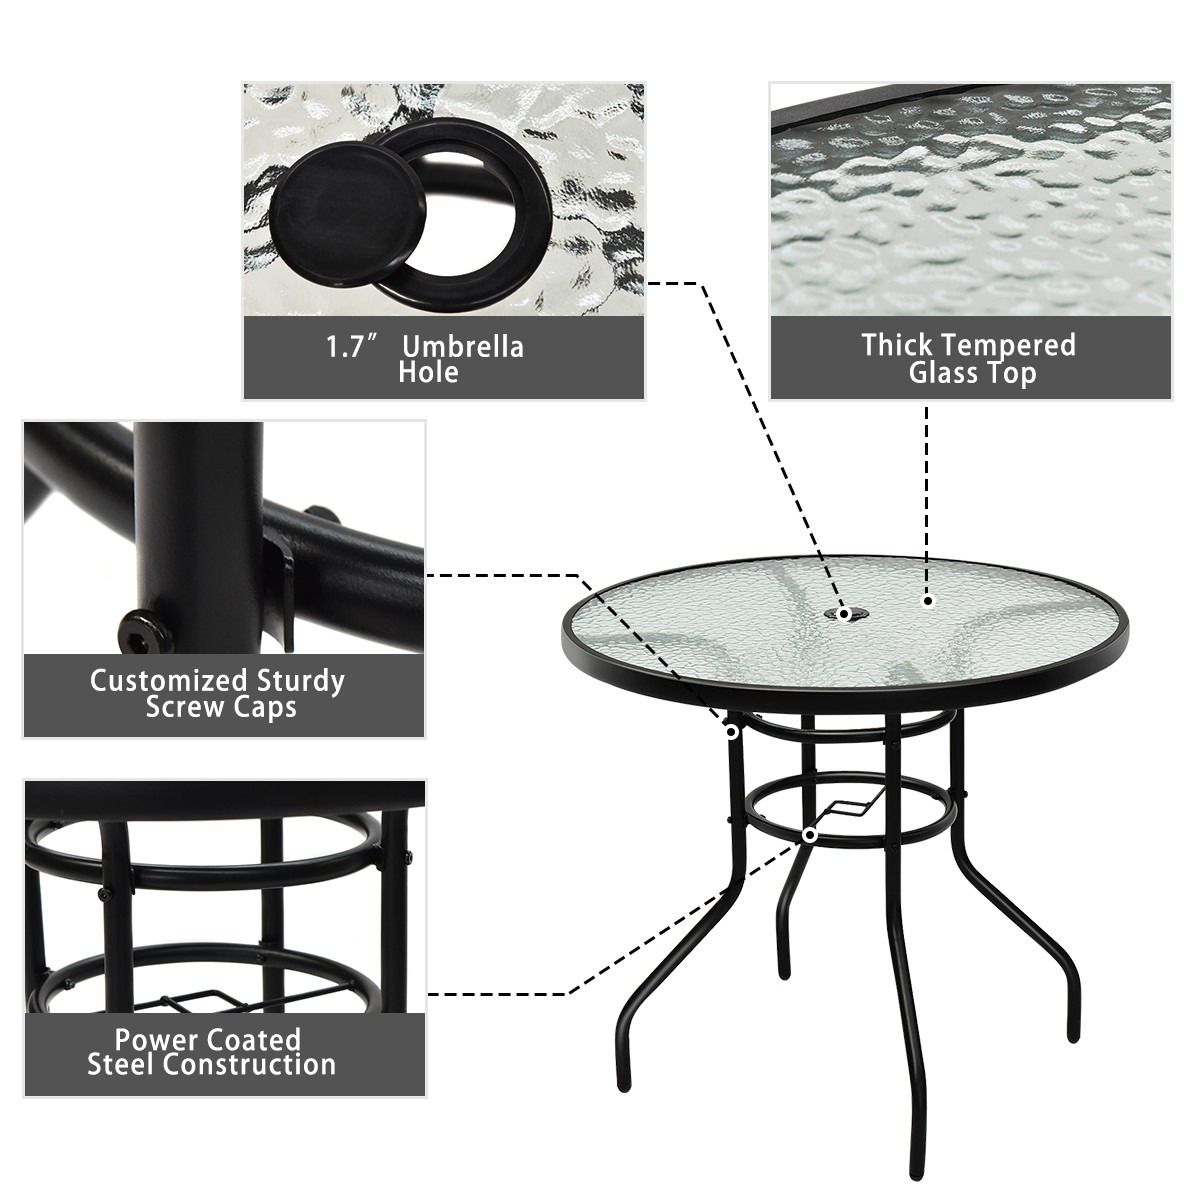 Goorabbit Outdoor Glass Table 32" Outdoor Bistro Table Patio Dining Table Round Side Table Coffee Table Furniture with Umbrella Hole, Metal Frame Water Ripple Glass Top(Black) - image 4 of 8